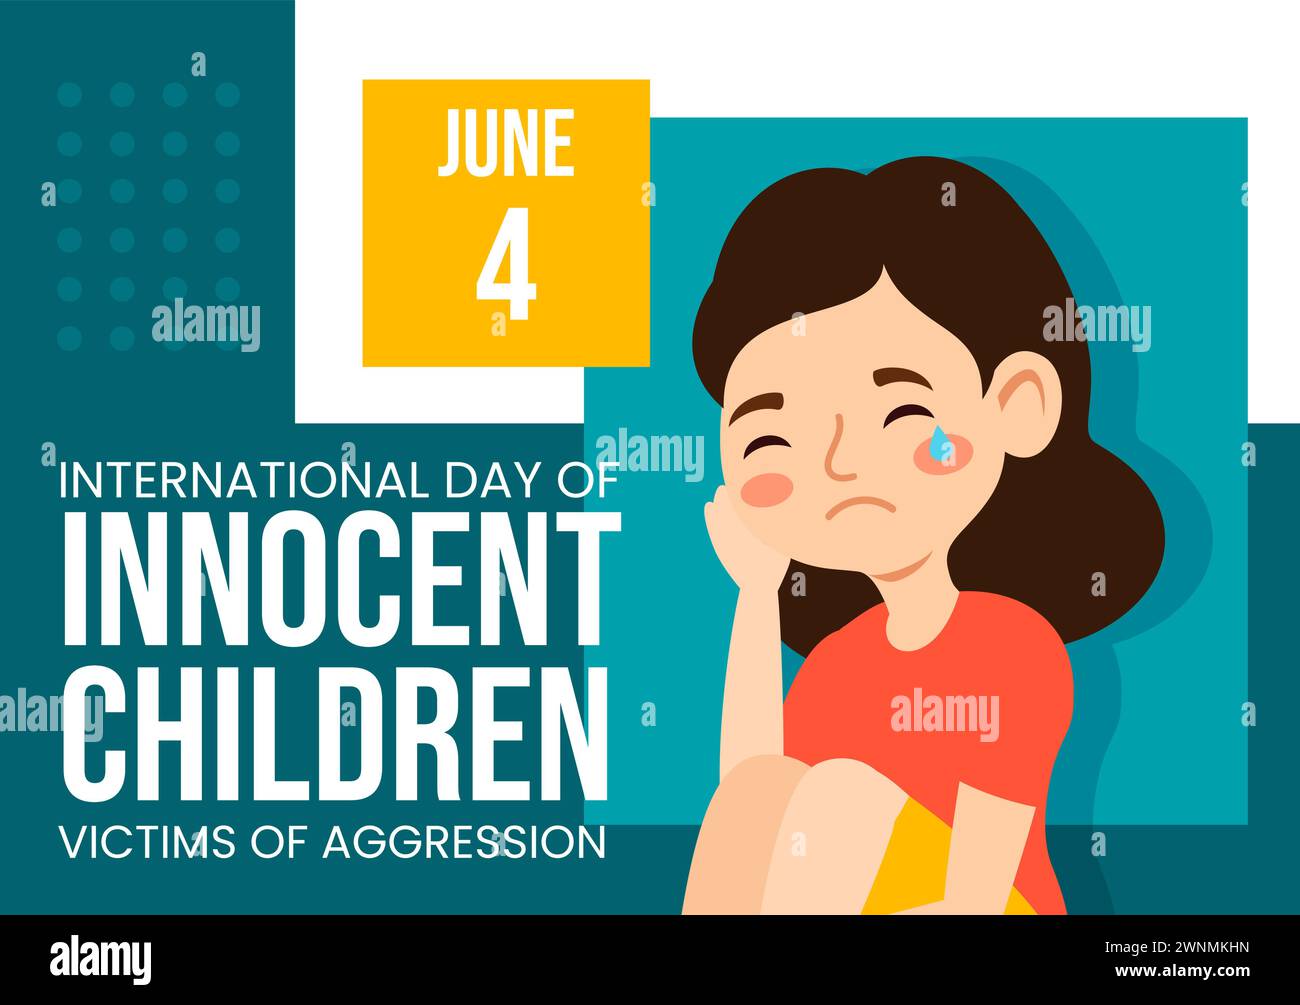 Innocent Children Victims of Aggression Social Media Background Hand Drawn Templates Illustration Stock Vector